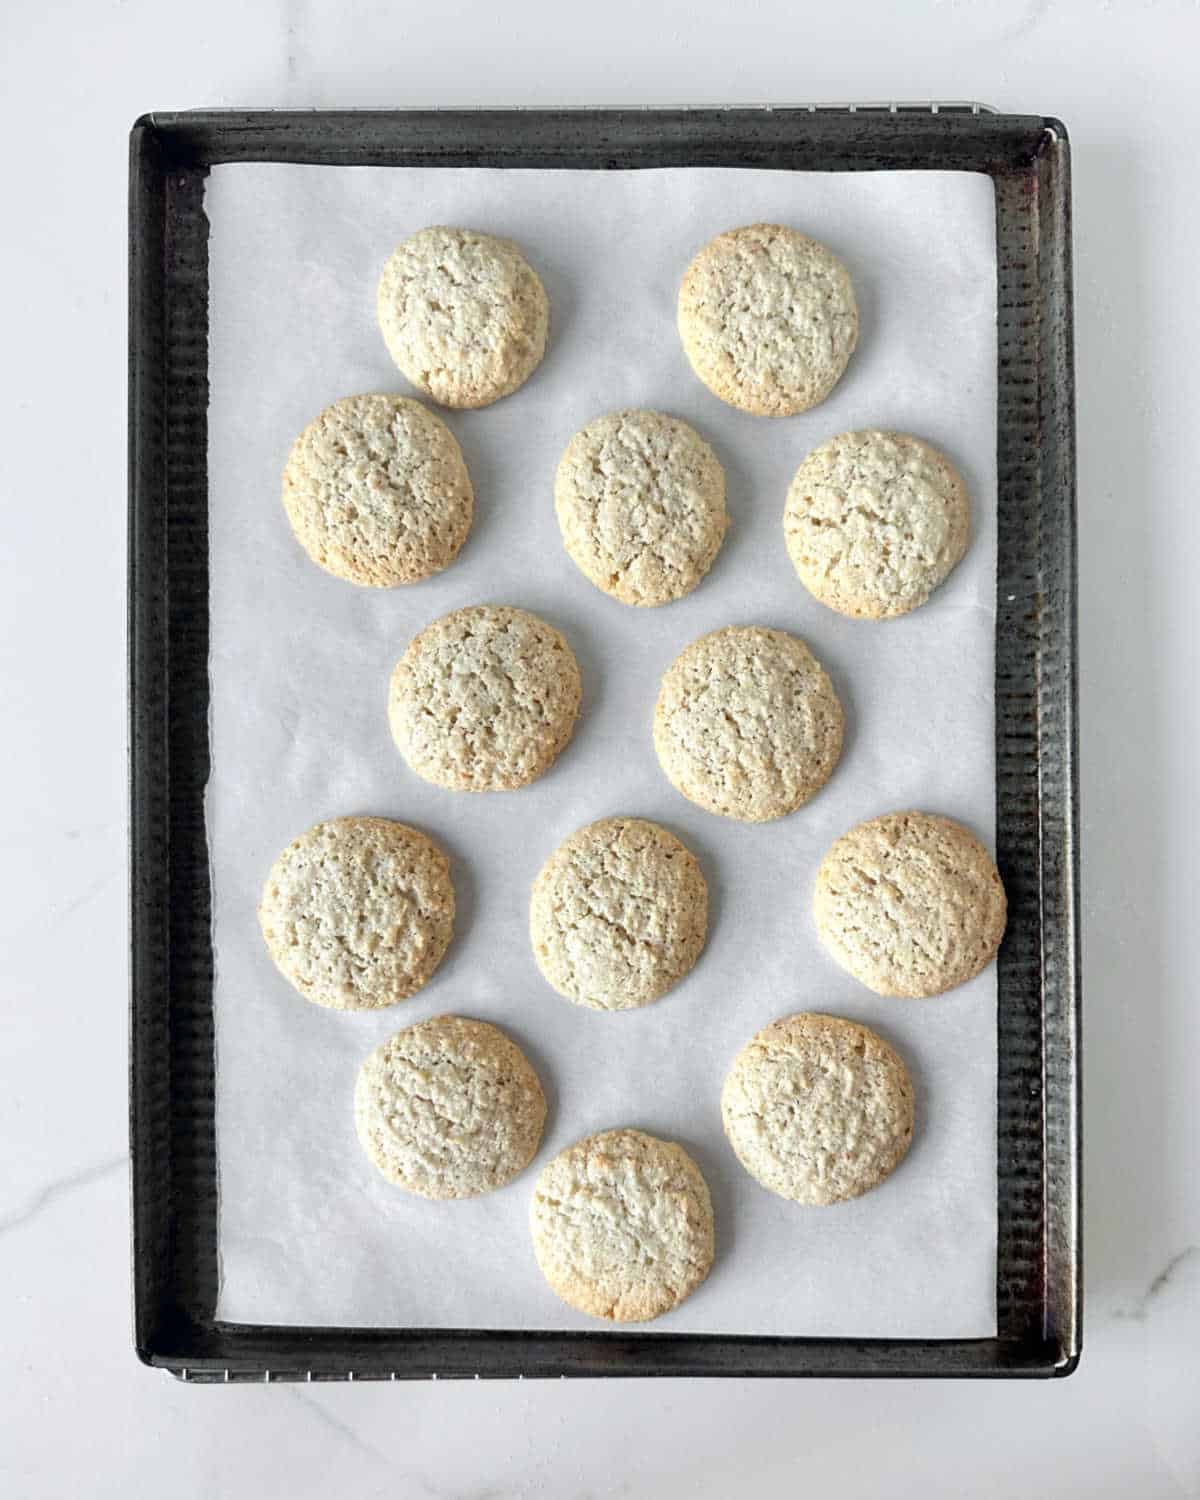 Baked almond macaroons on white parchment paper on a dark metal cookie sheet. White marble surface.